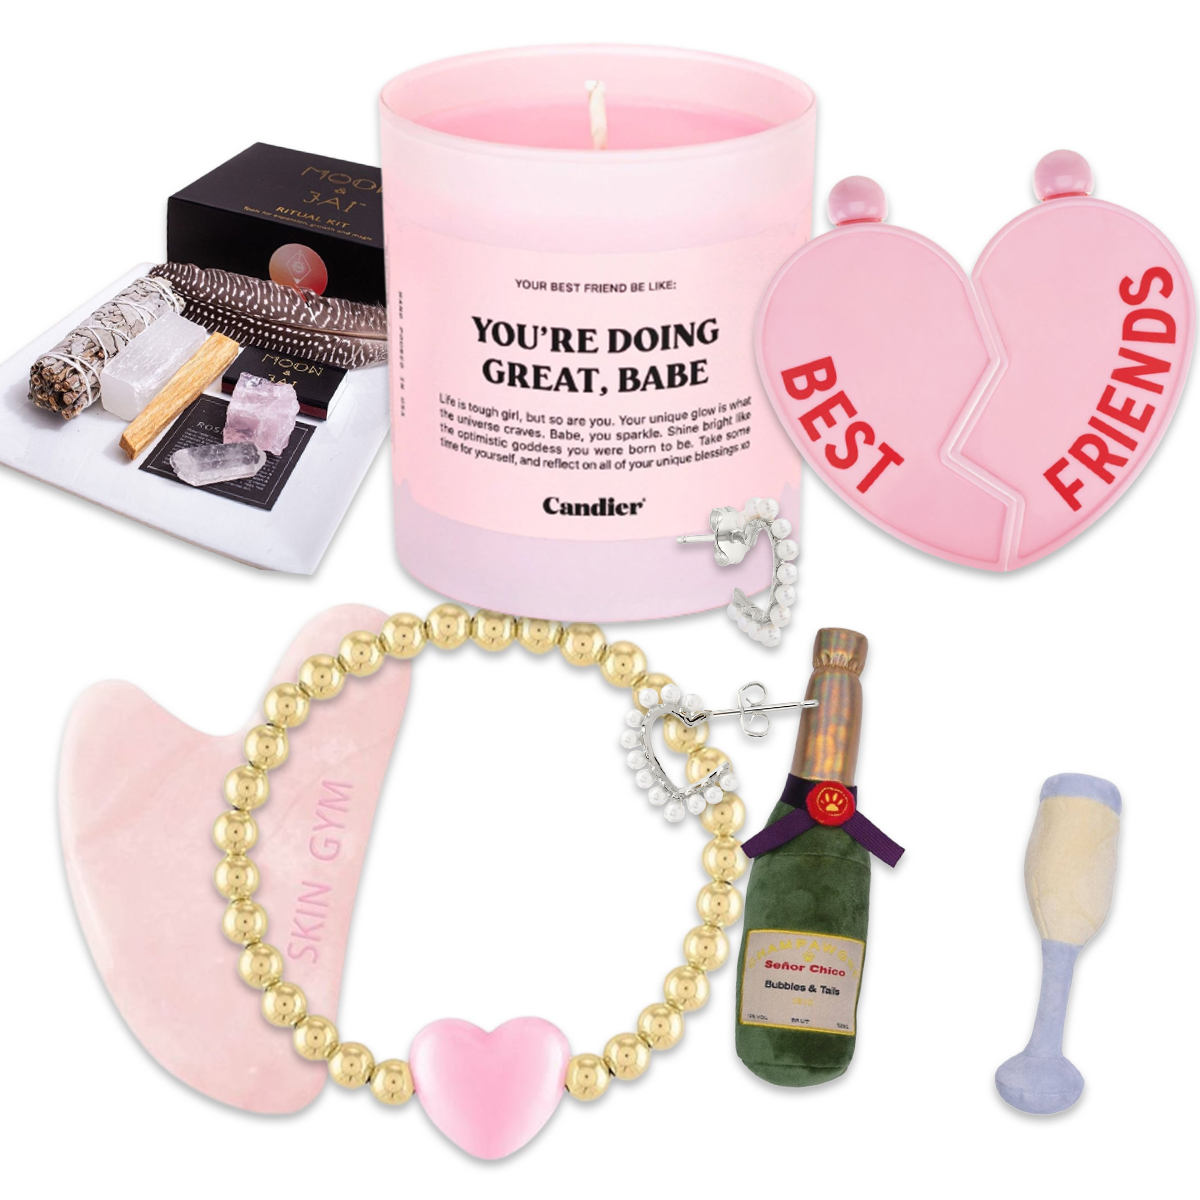 7 gifts to get your galentine